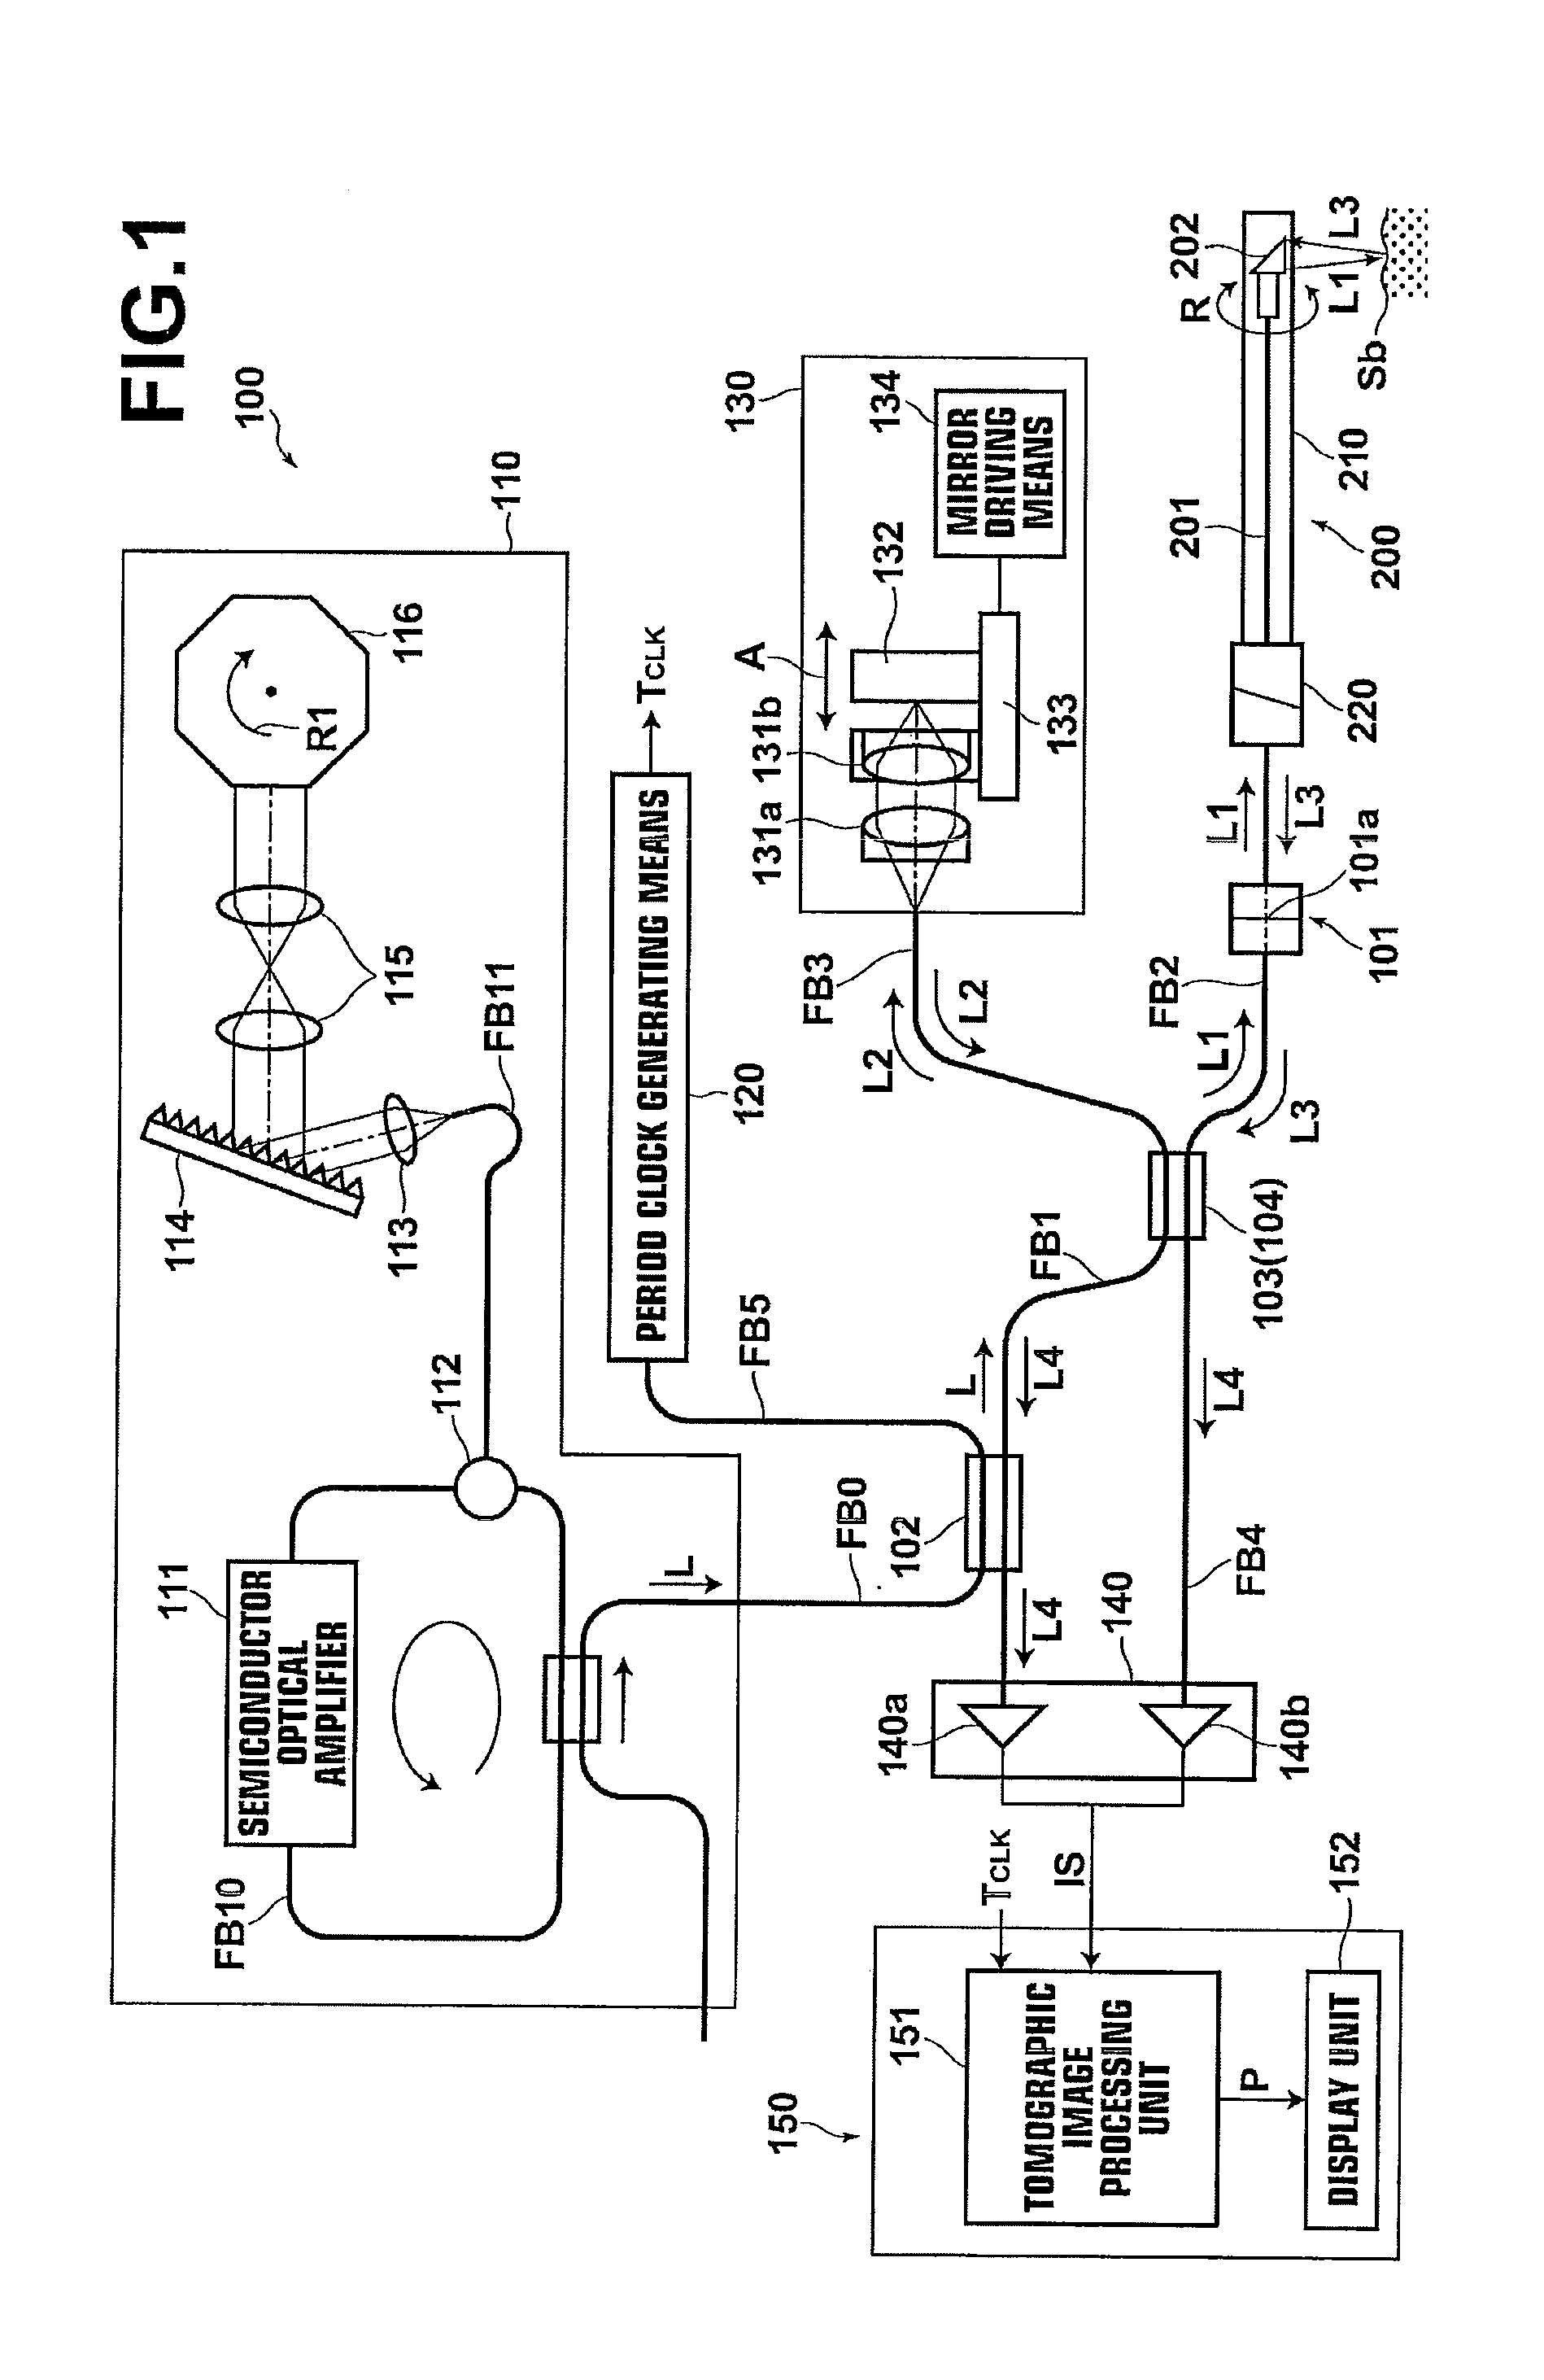 Calibration jig for optical tomographic imaging apparatus and method for generating a calibration conversion table